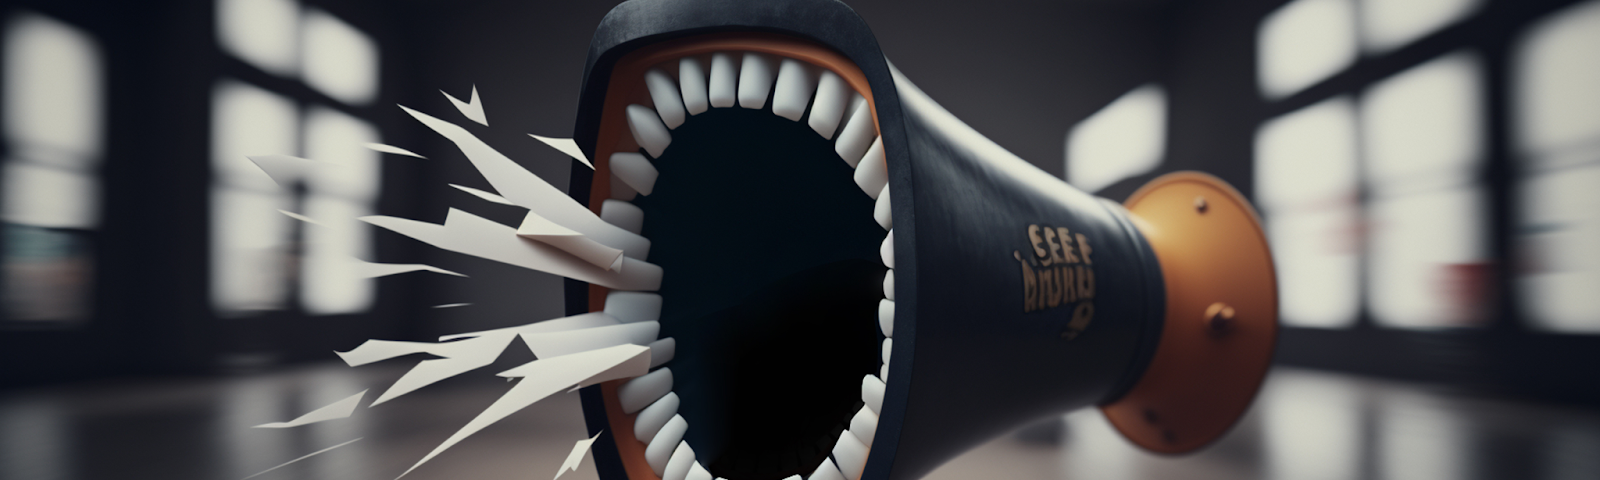 a graphic image of a screaming megaphone with a mouthful of teeth